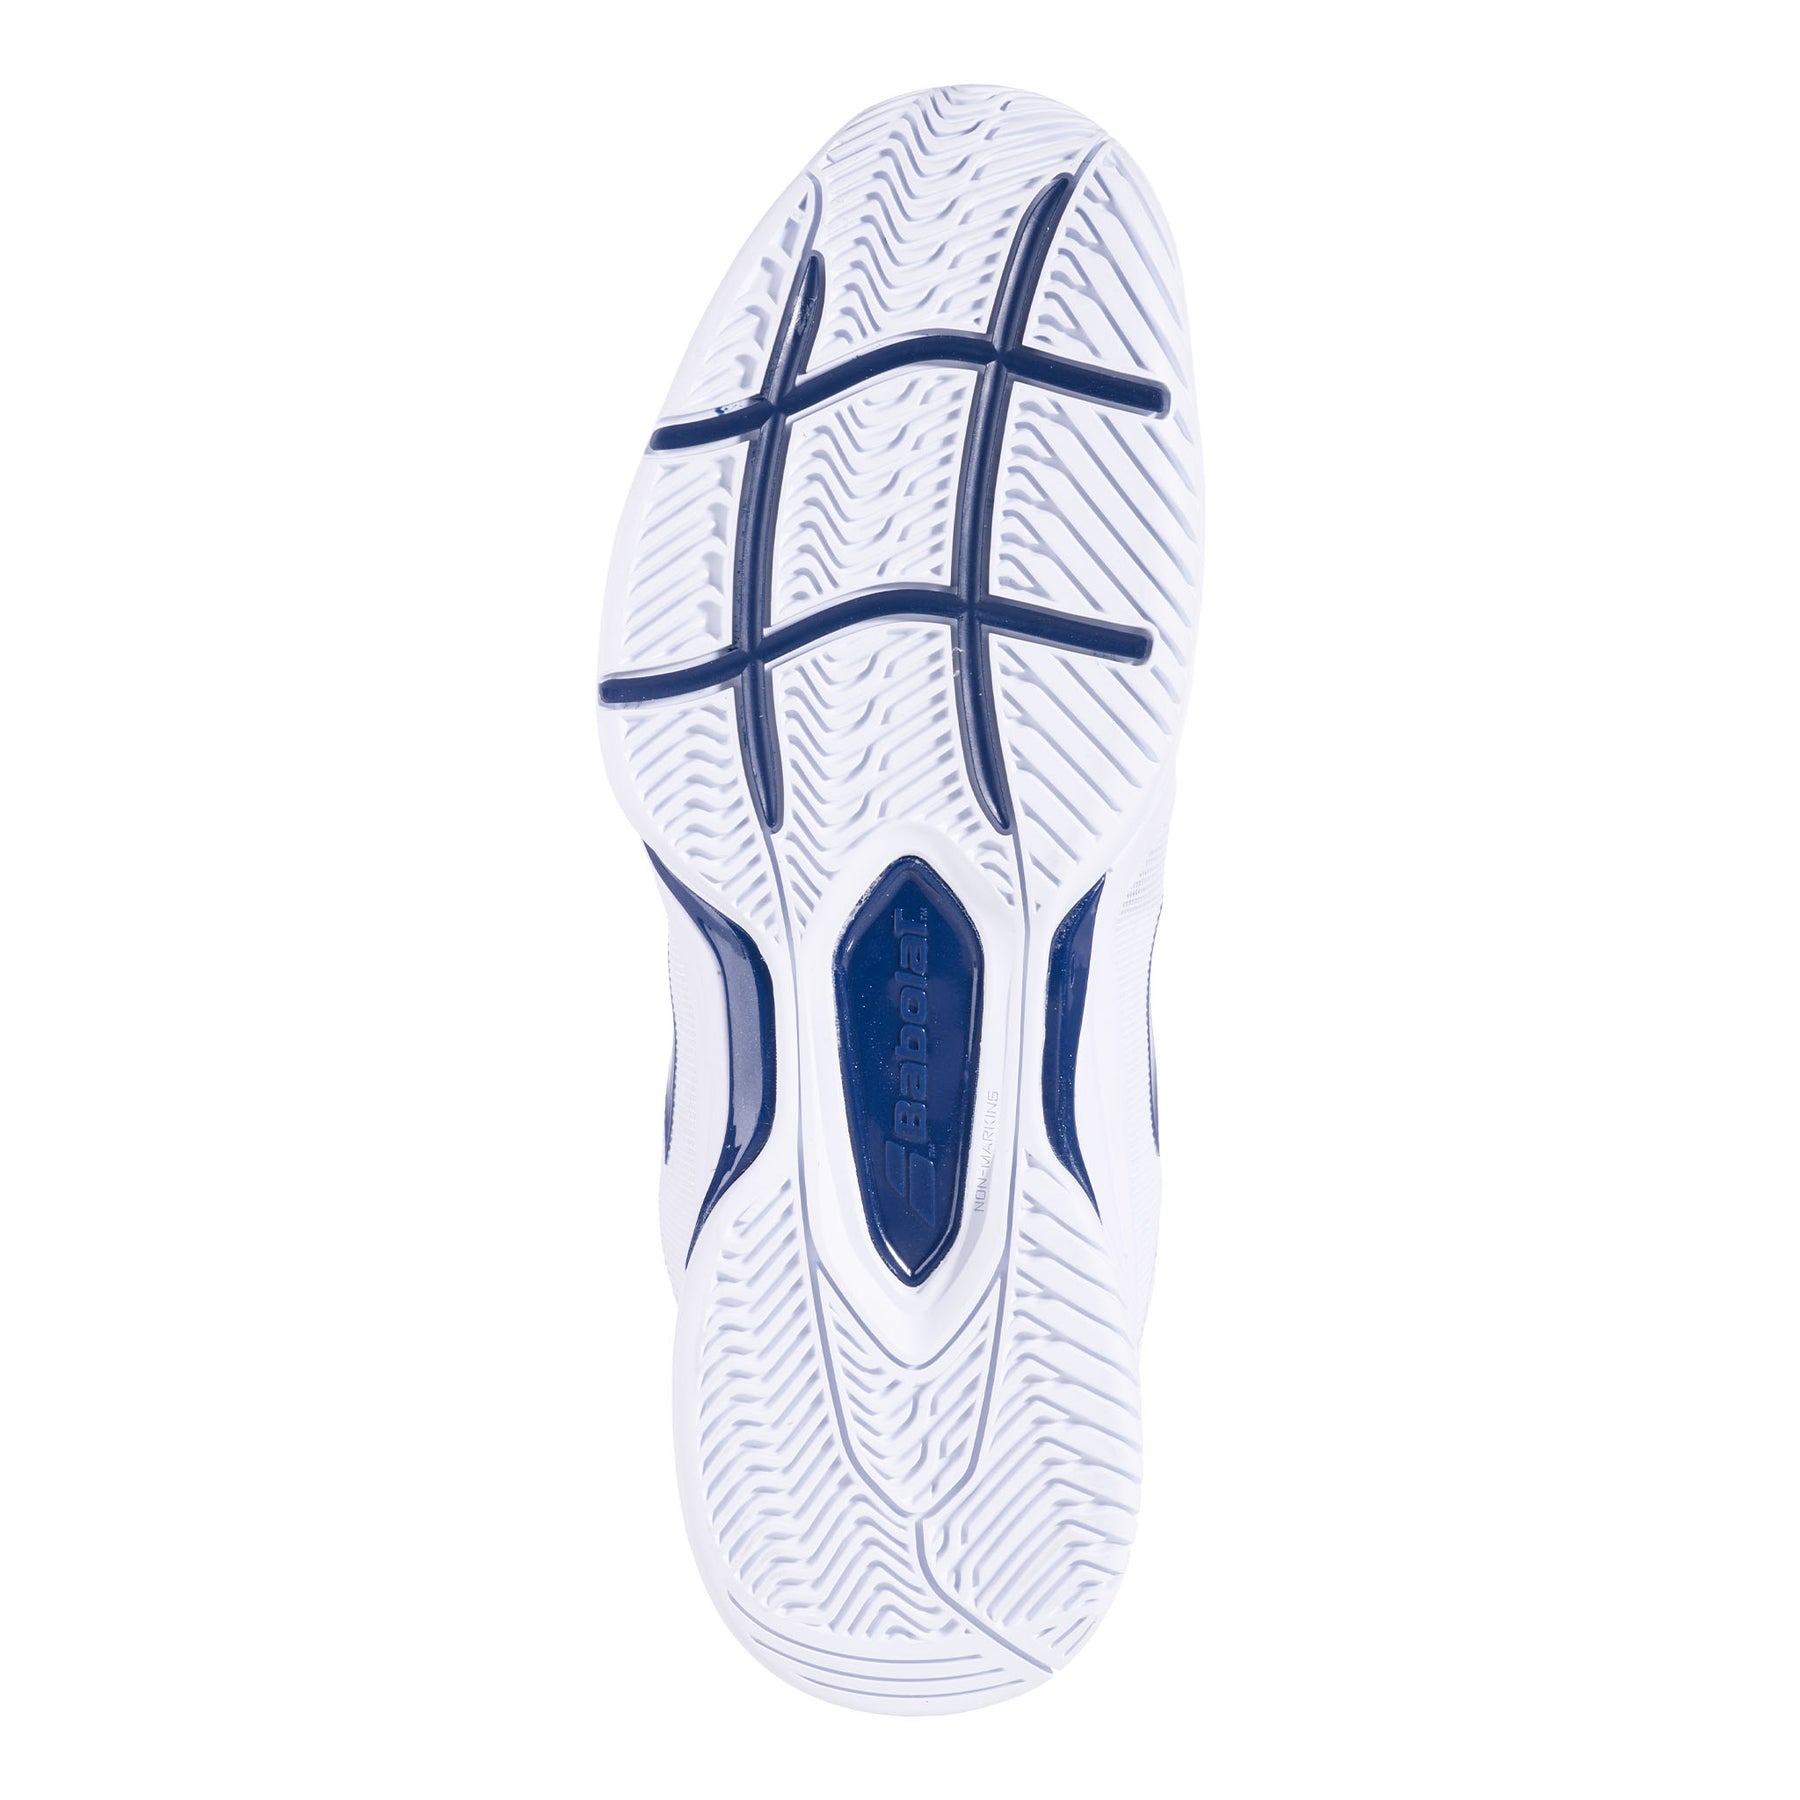 Babolat SFX3 All Court Mens Tennis Shoes: White/Navy